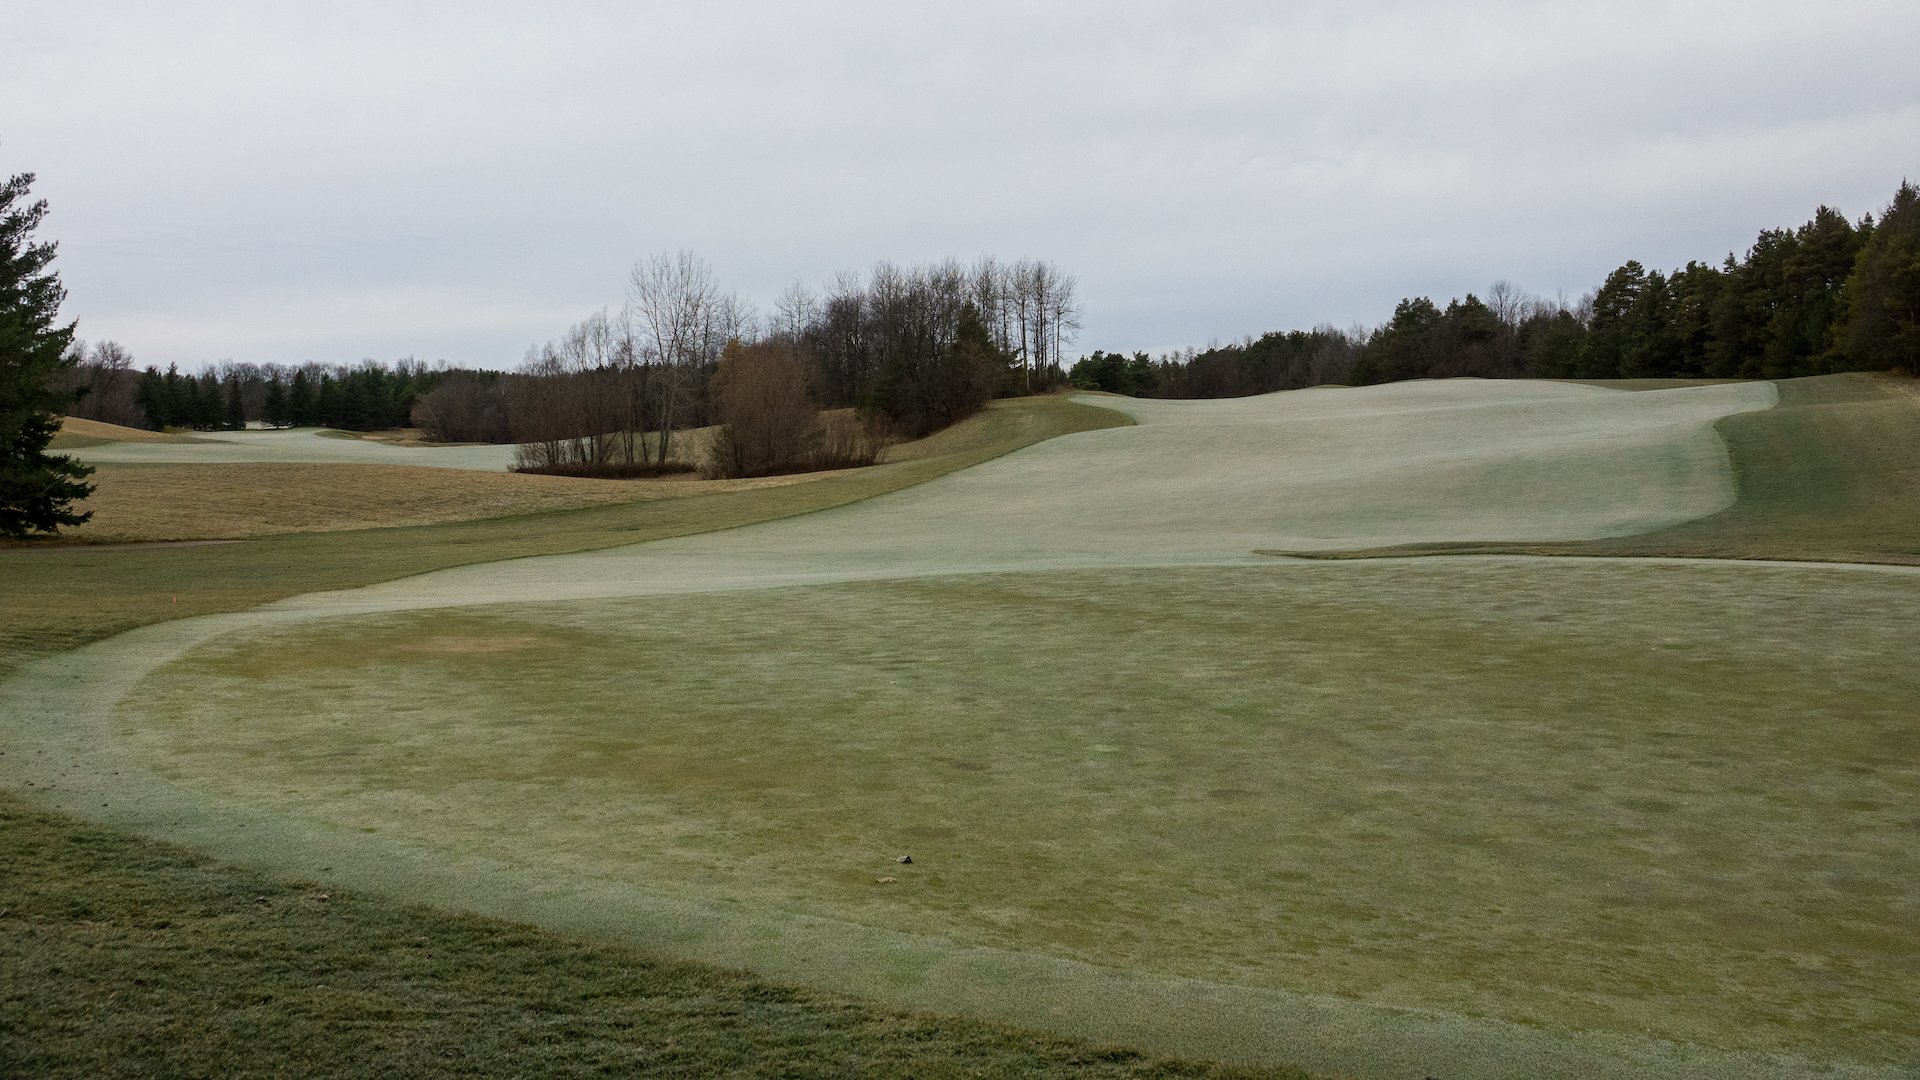  I wandered onto the golf course, as it was so odd to see the green grass (in the frost) this late in the year. 